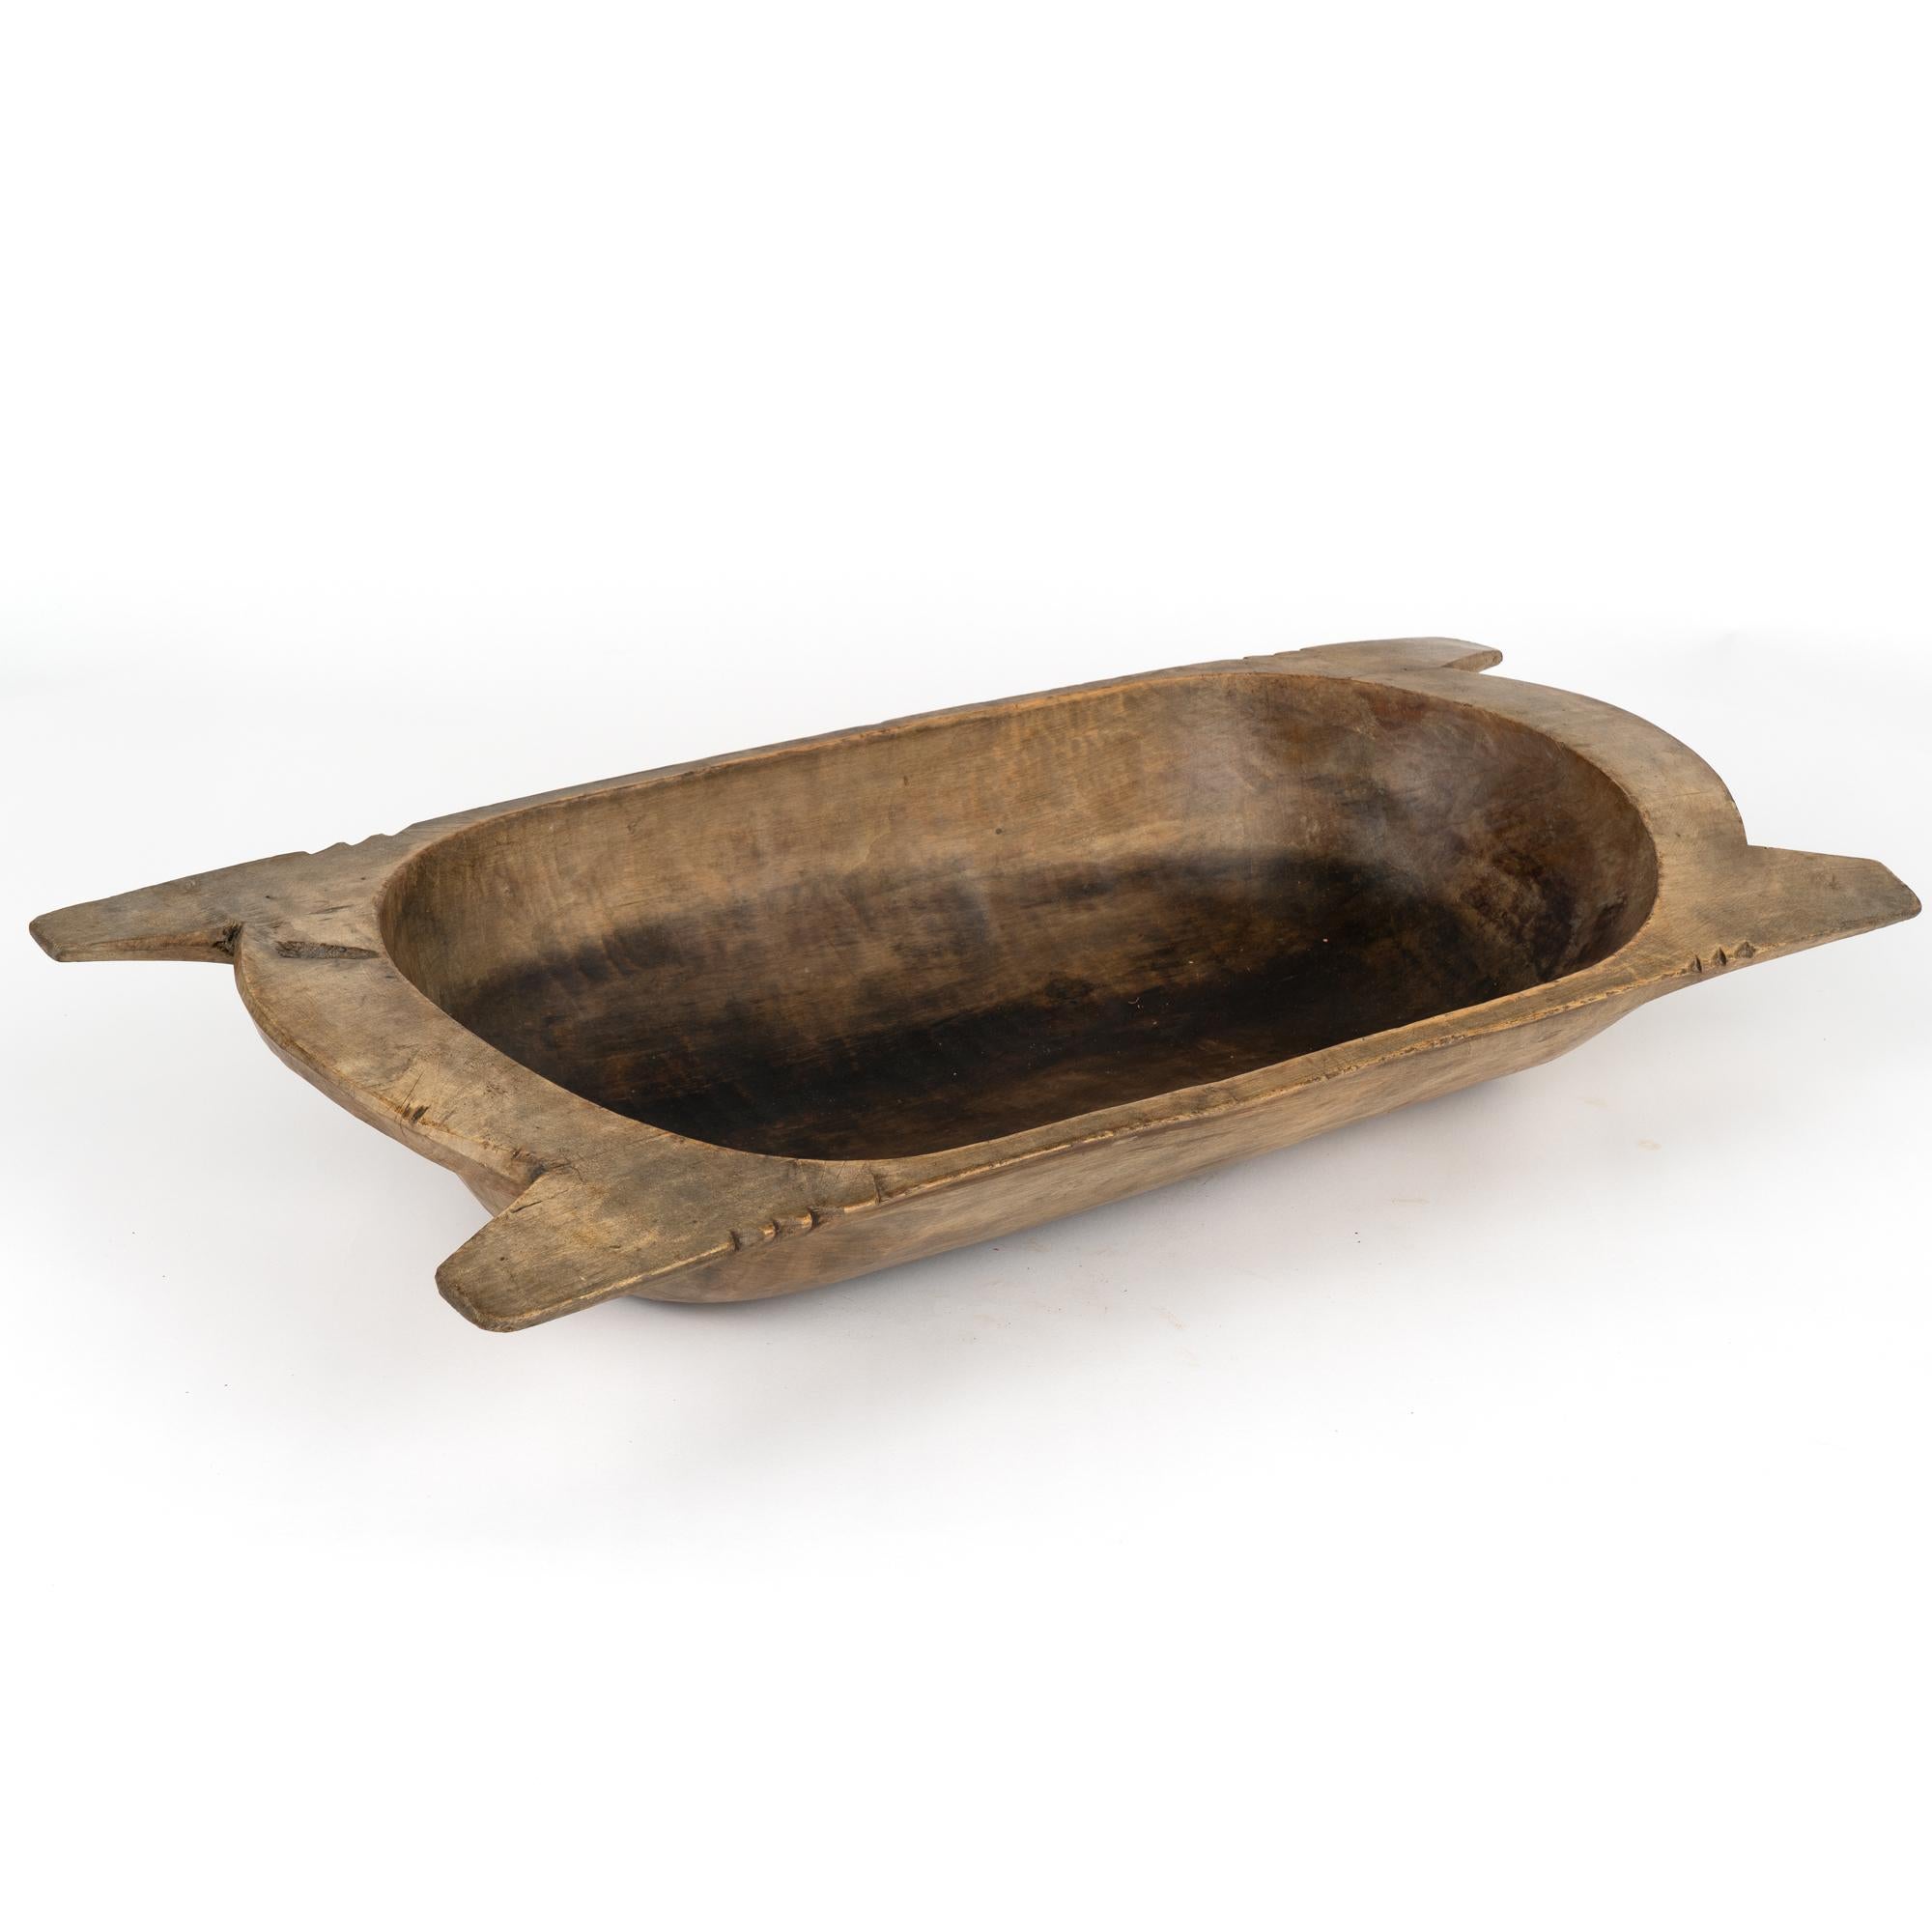 Antique, hand hewn, European country dough bowl / trencher featuring a rounded rectangular shape, tapered base and handles.
Old cracks, nicks, stains, distress are reflective of generations of use. 
Waxed and ready to use as decorative bowl.

With